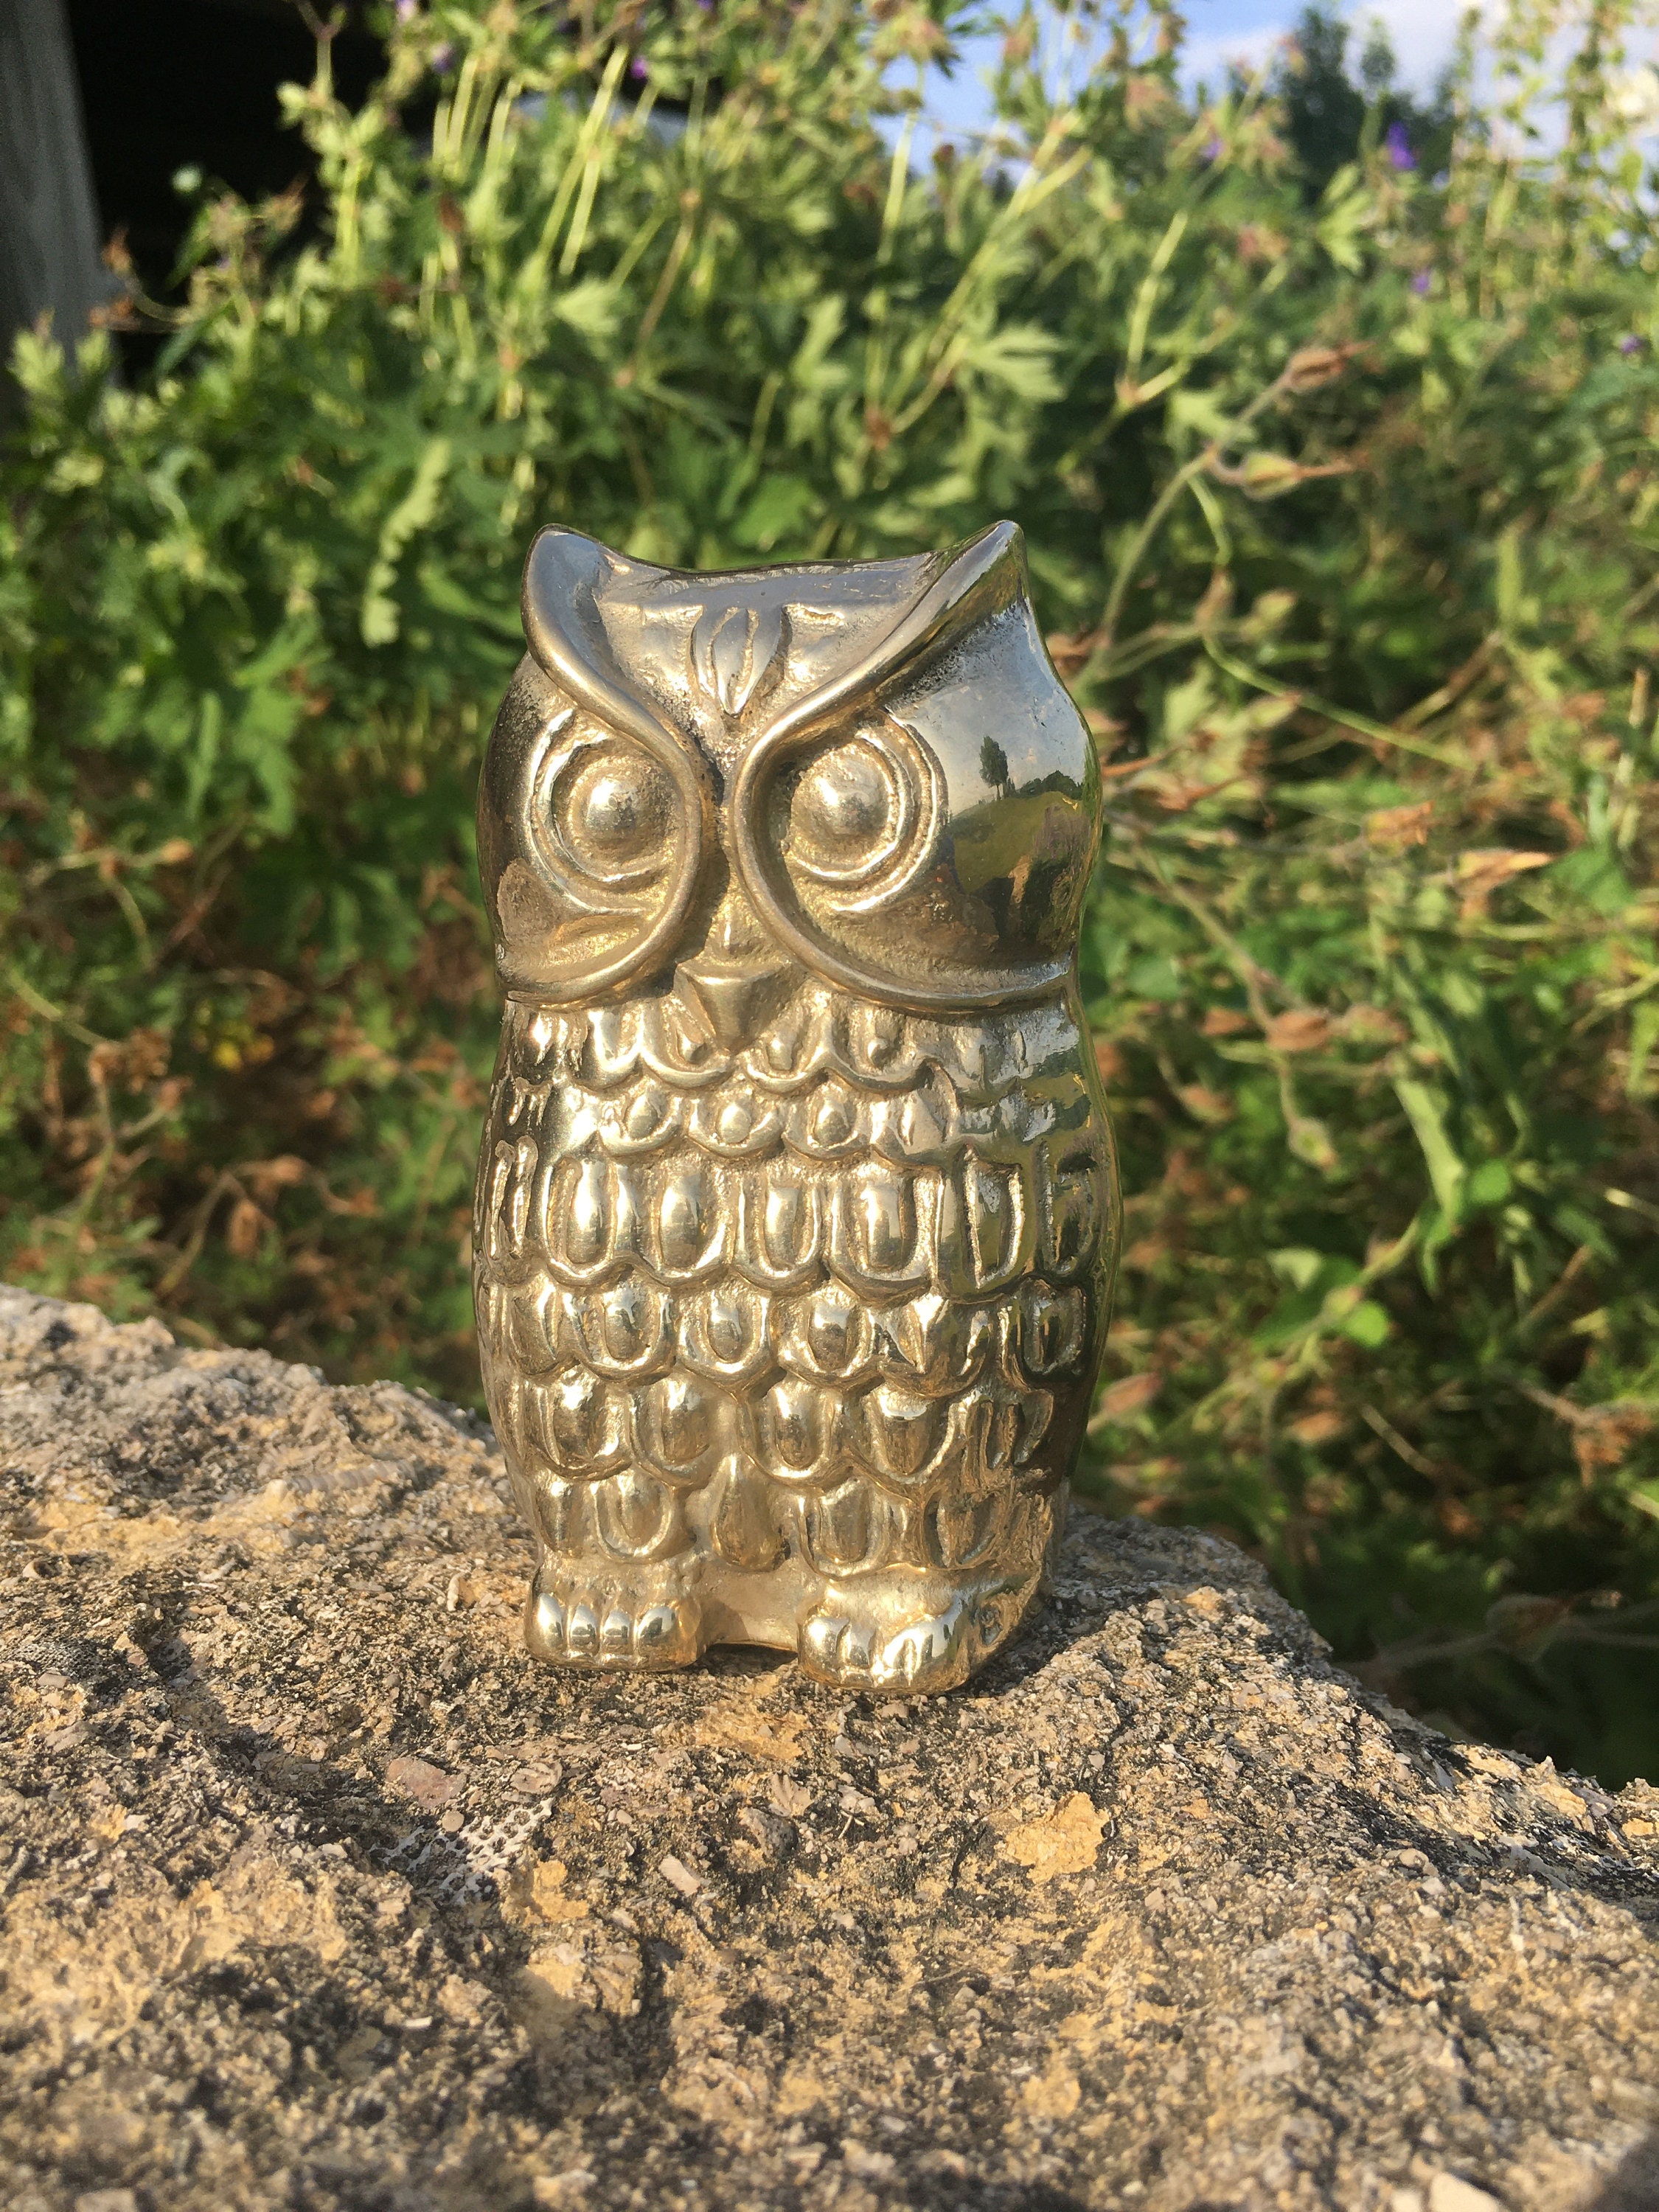 Brass Owl Figurine Statue at Rs 750/piece